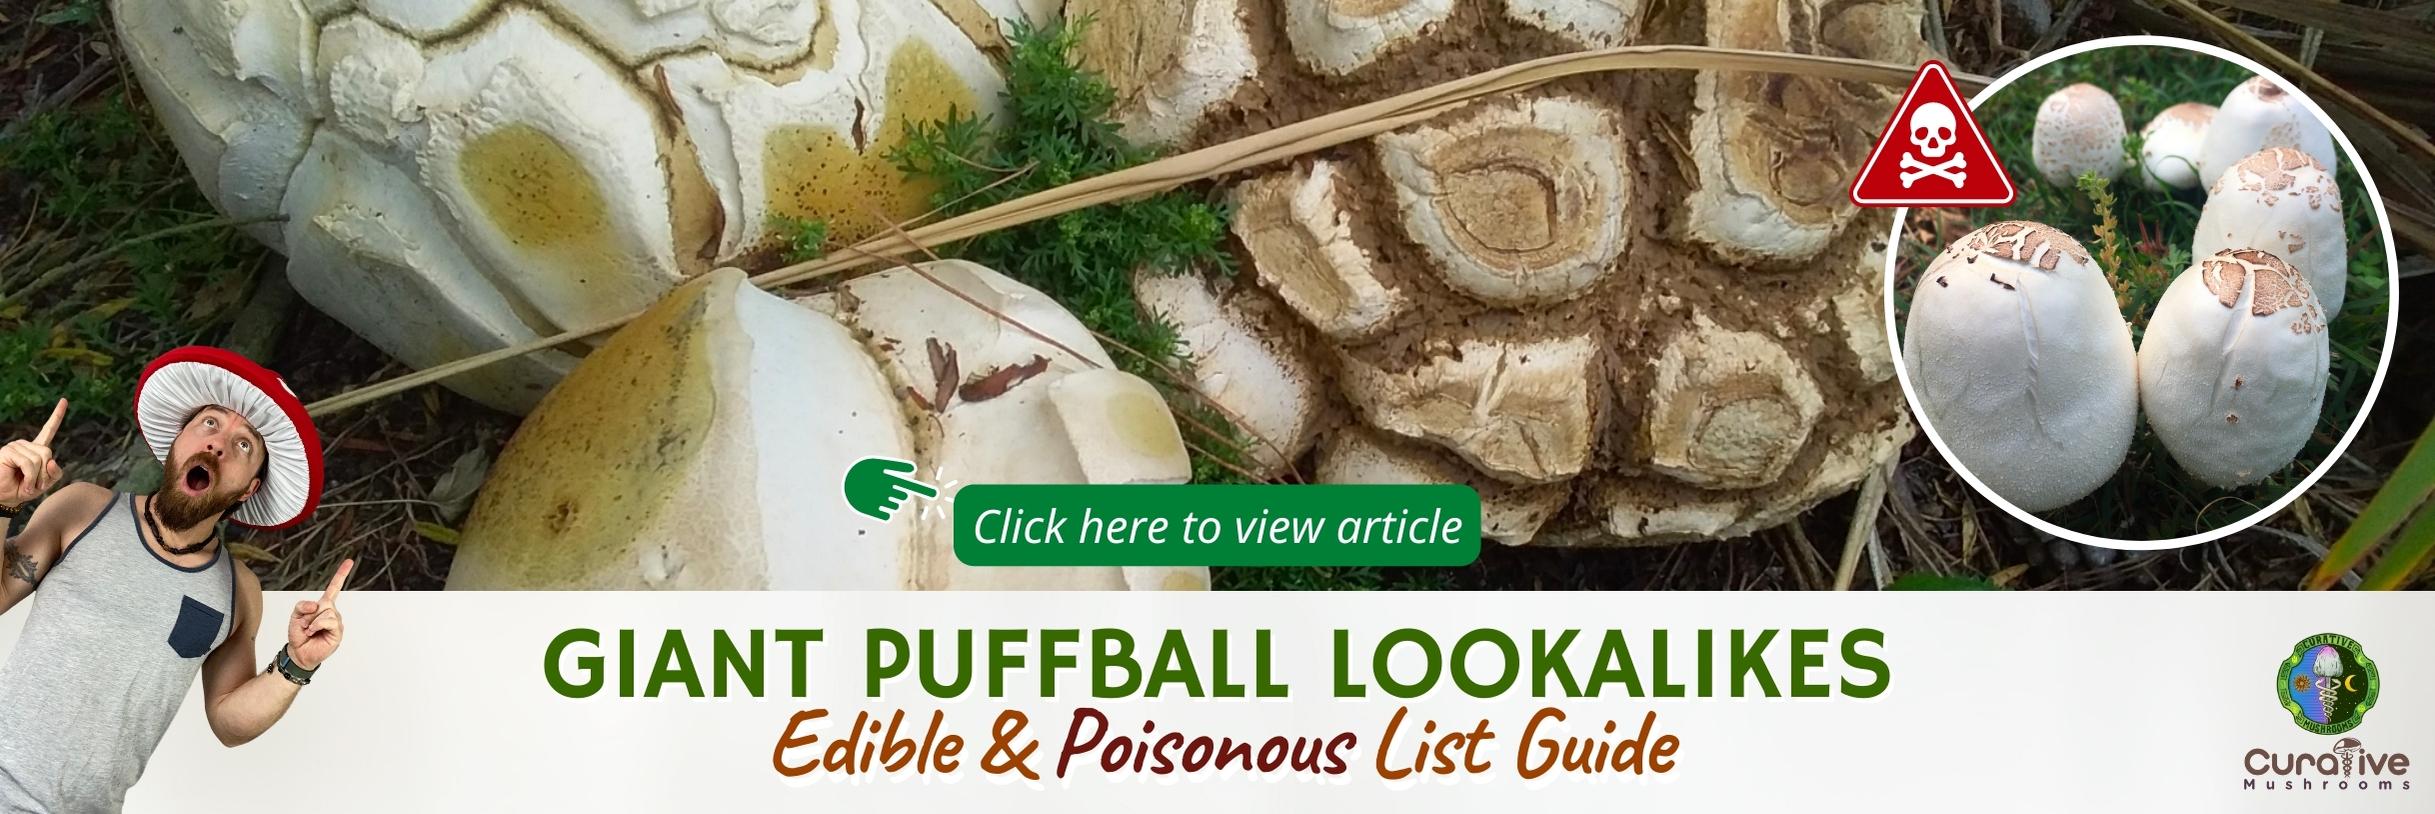 Giant Puffball Lookalikes - Edible and Poisonous List Complete Guide